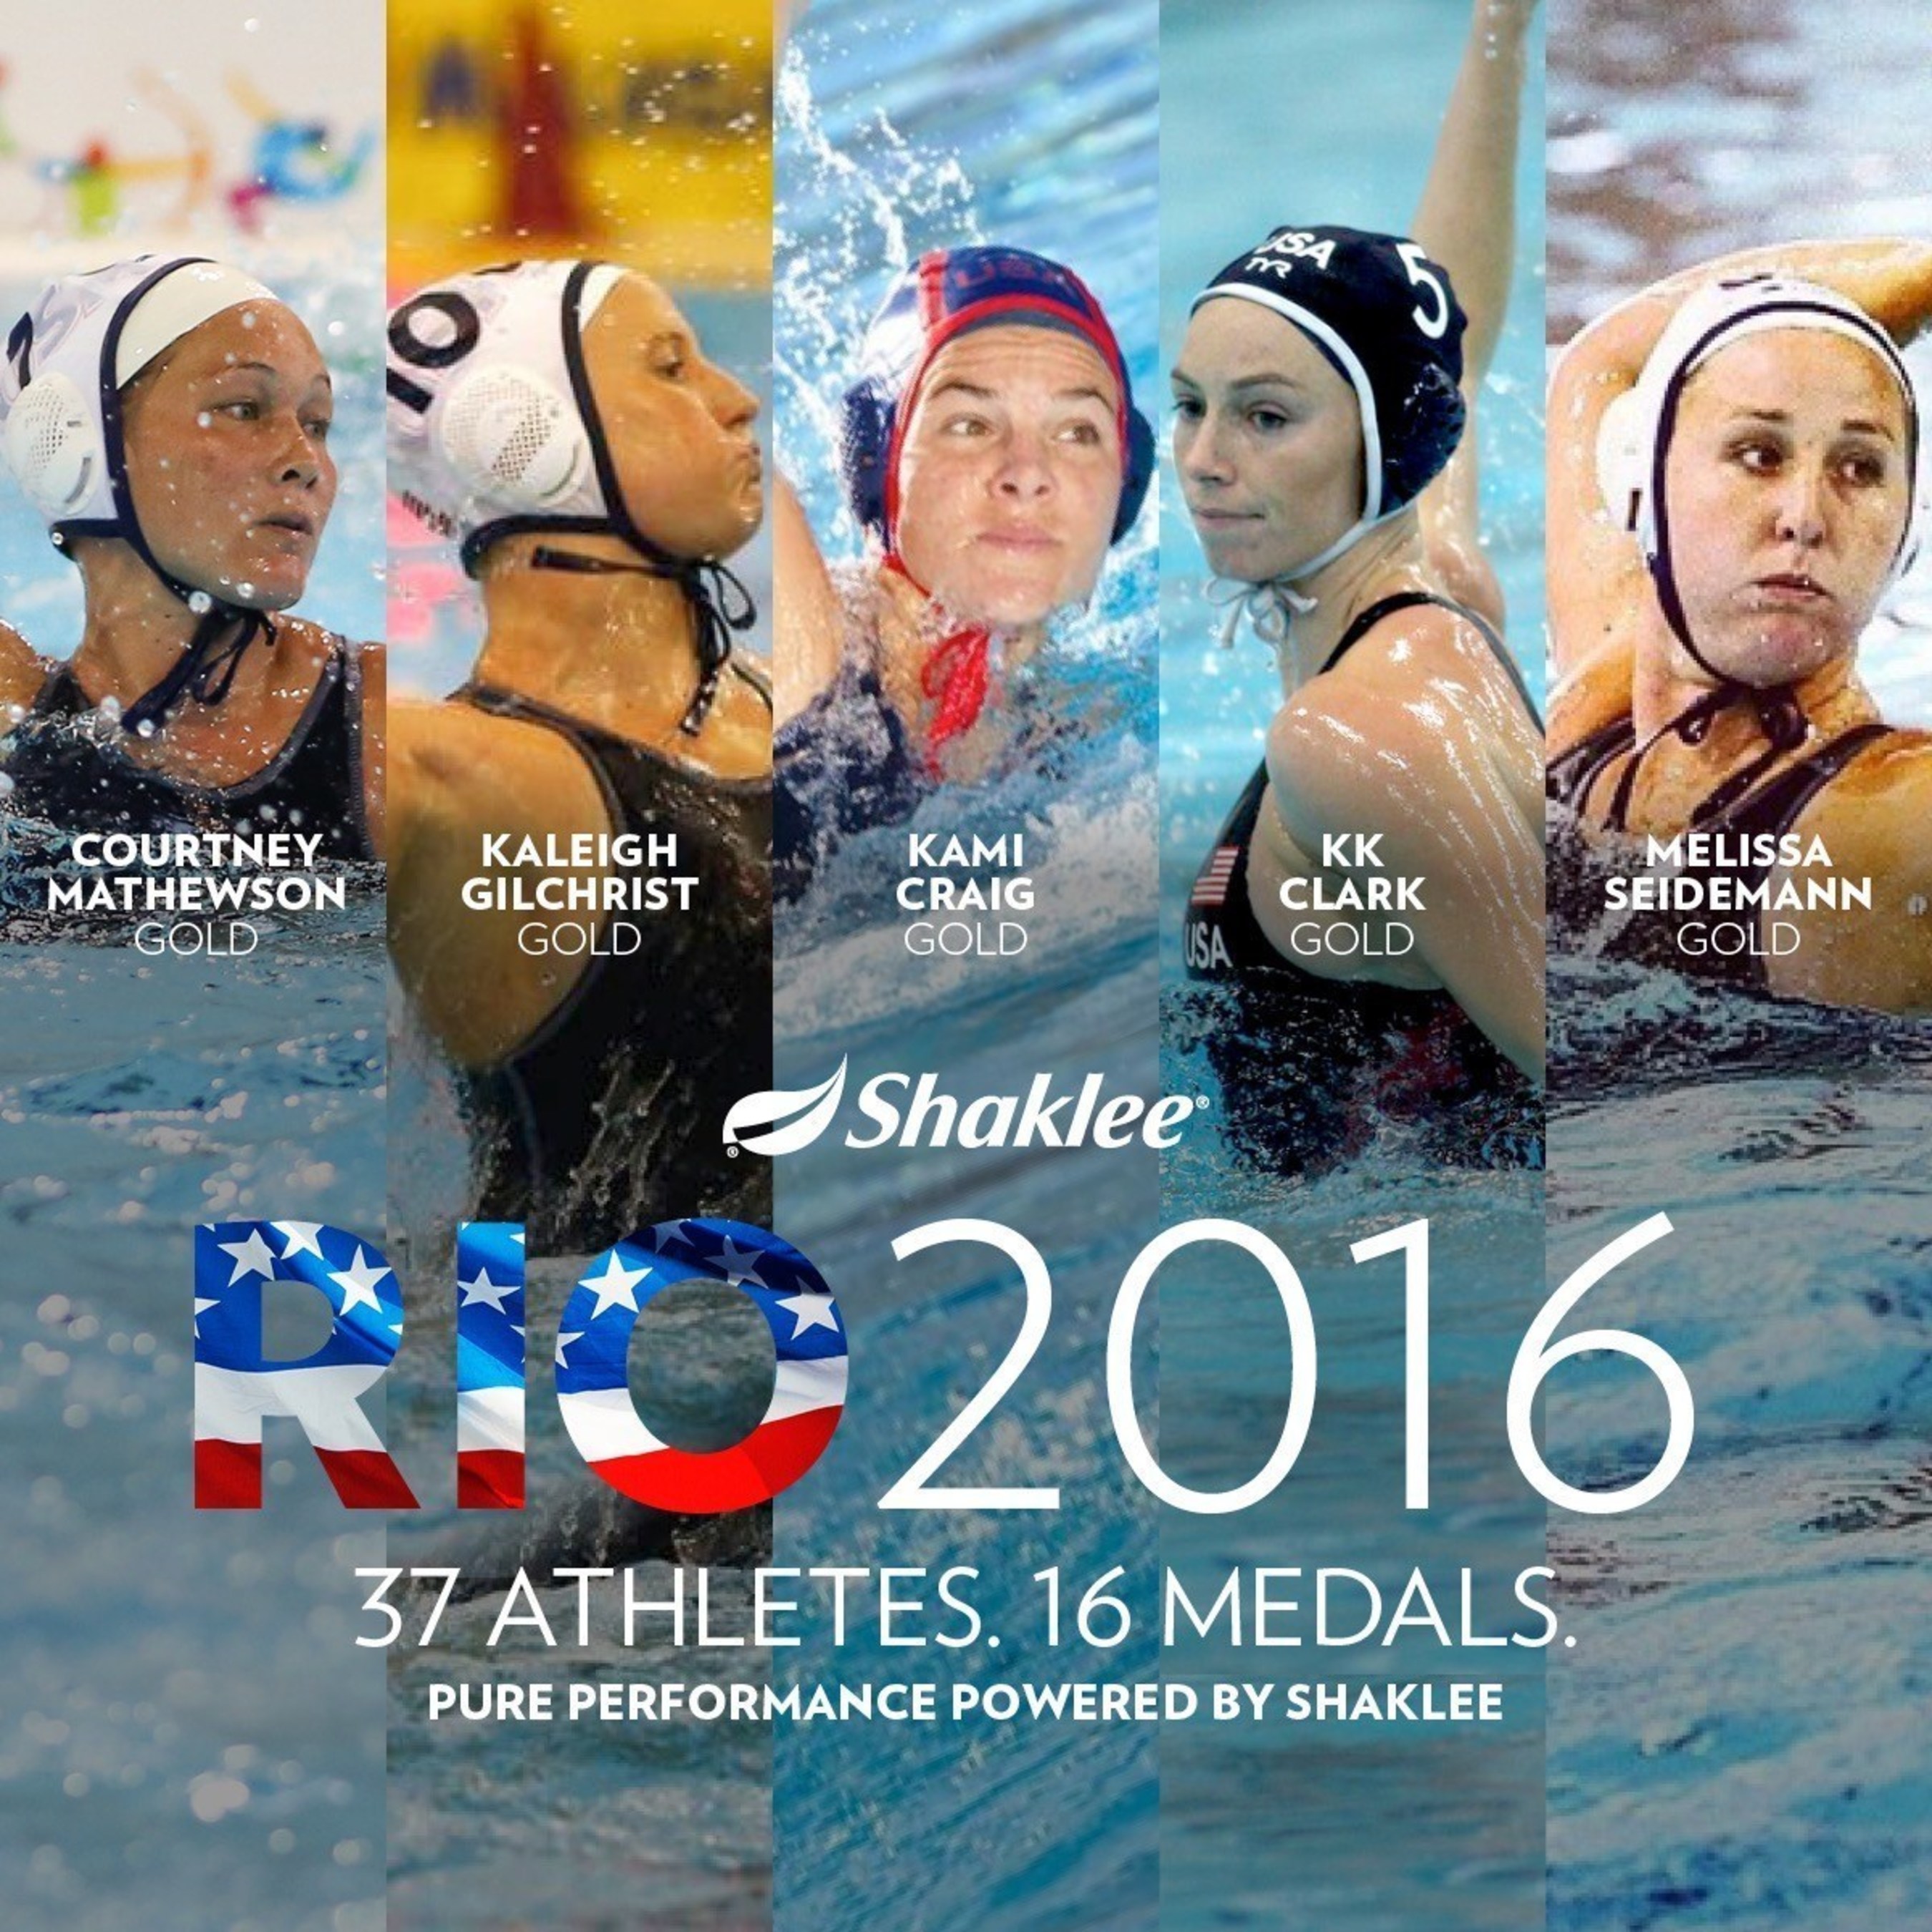 Shaklee Pure Performance Team athletes win 16 medals in Rio.